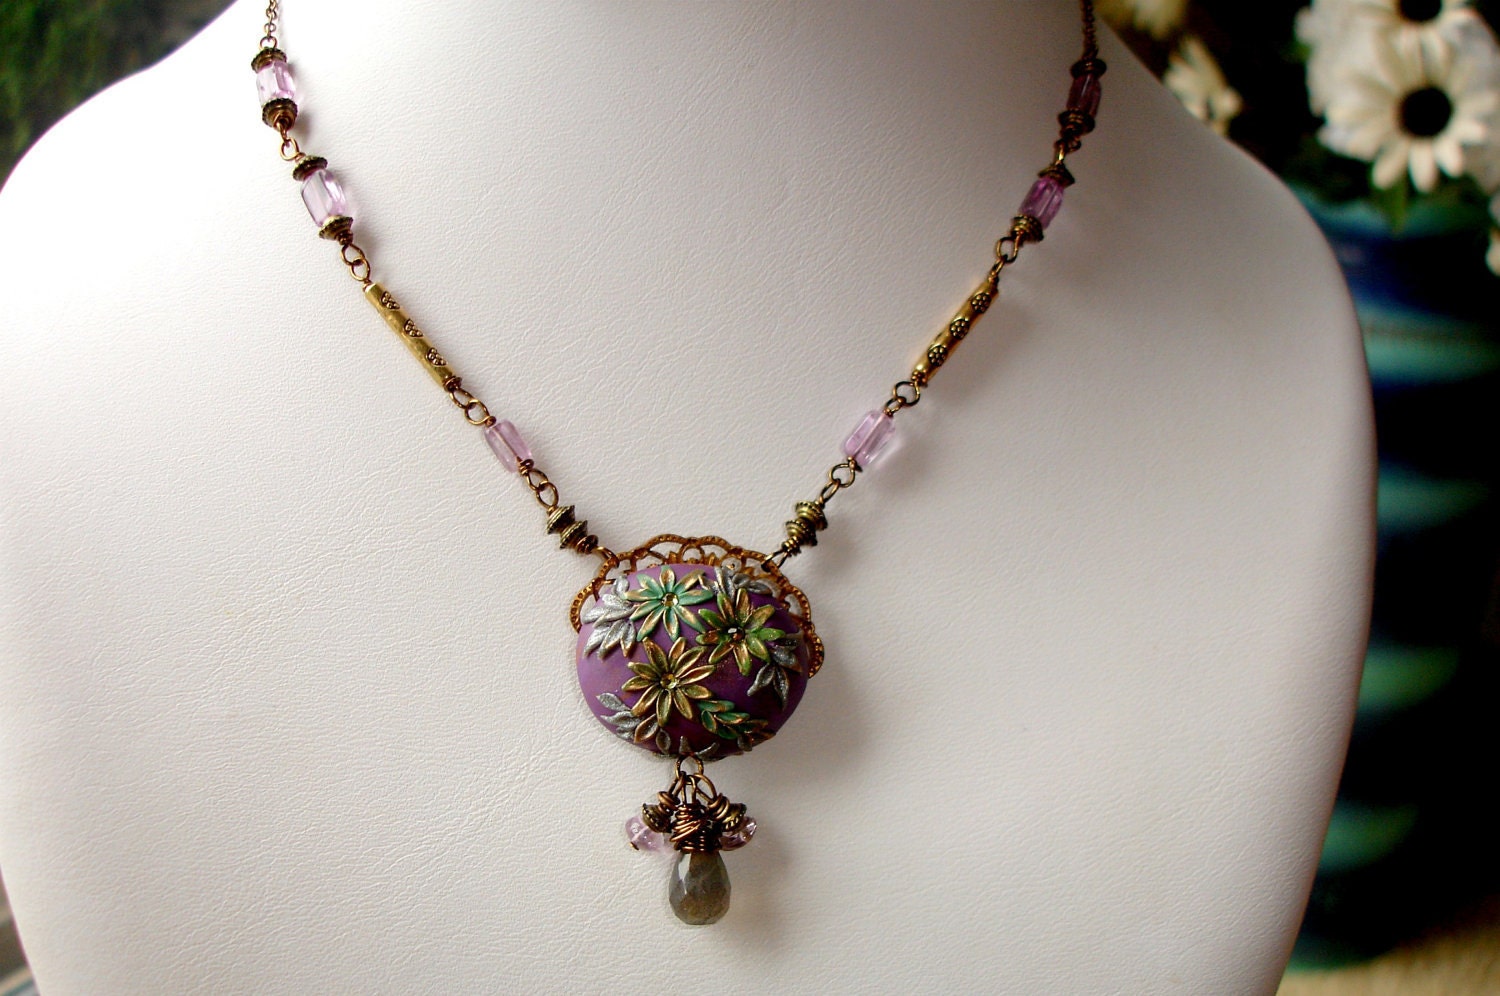 Lovely Amethyst and Labradorite Vintage Necklace by Peelirohini